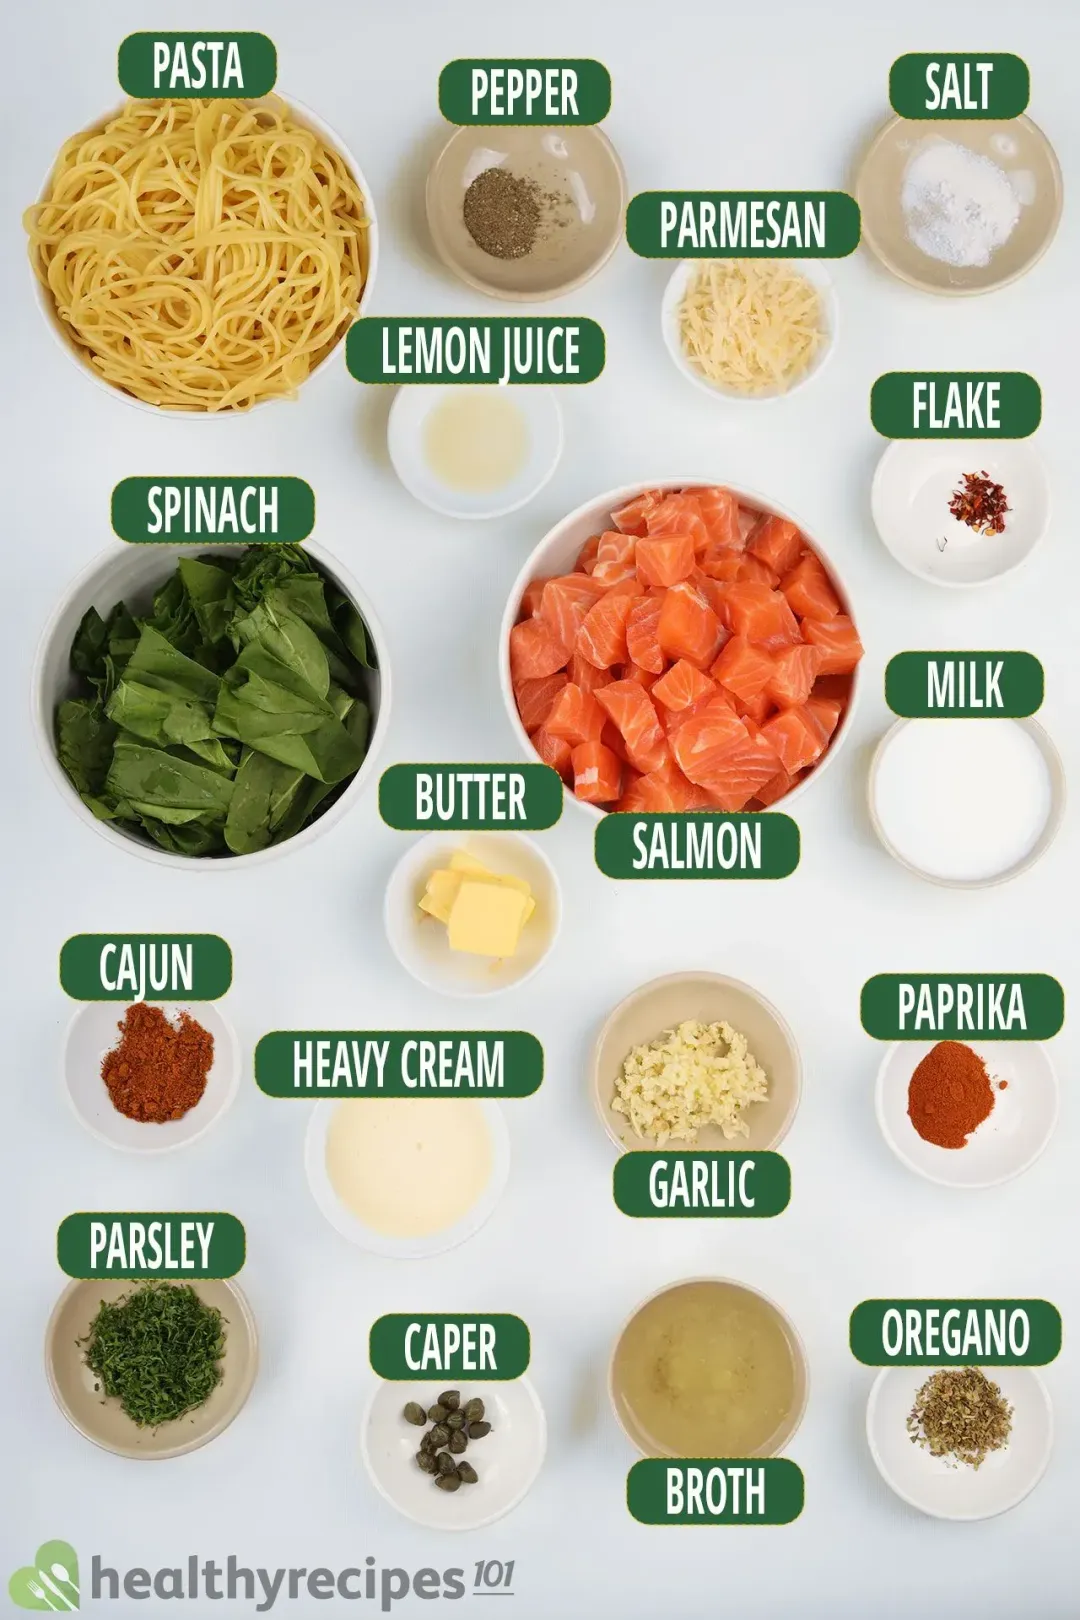 A bowl of raw cubed salmon fillets, a bowl of spinach, and a bowl of cooked spaghetti laid near various condiments